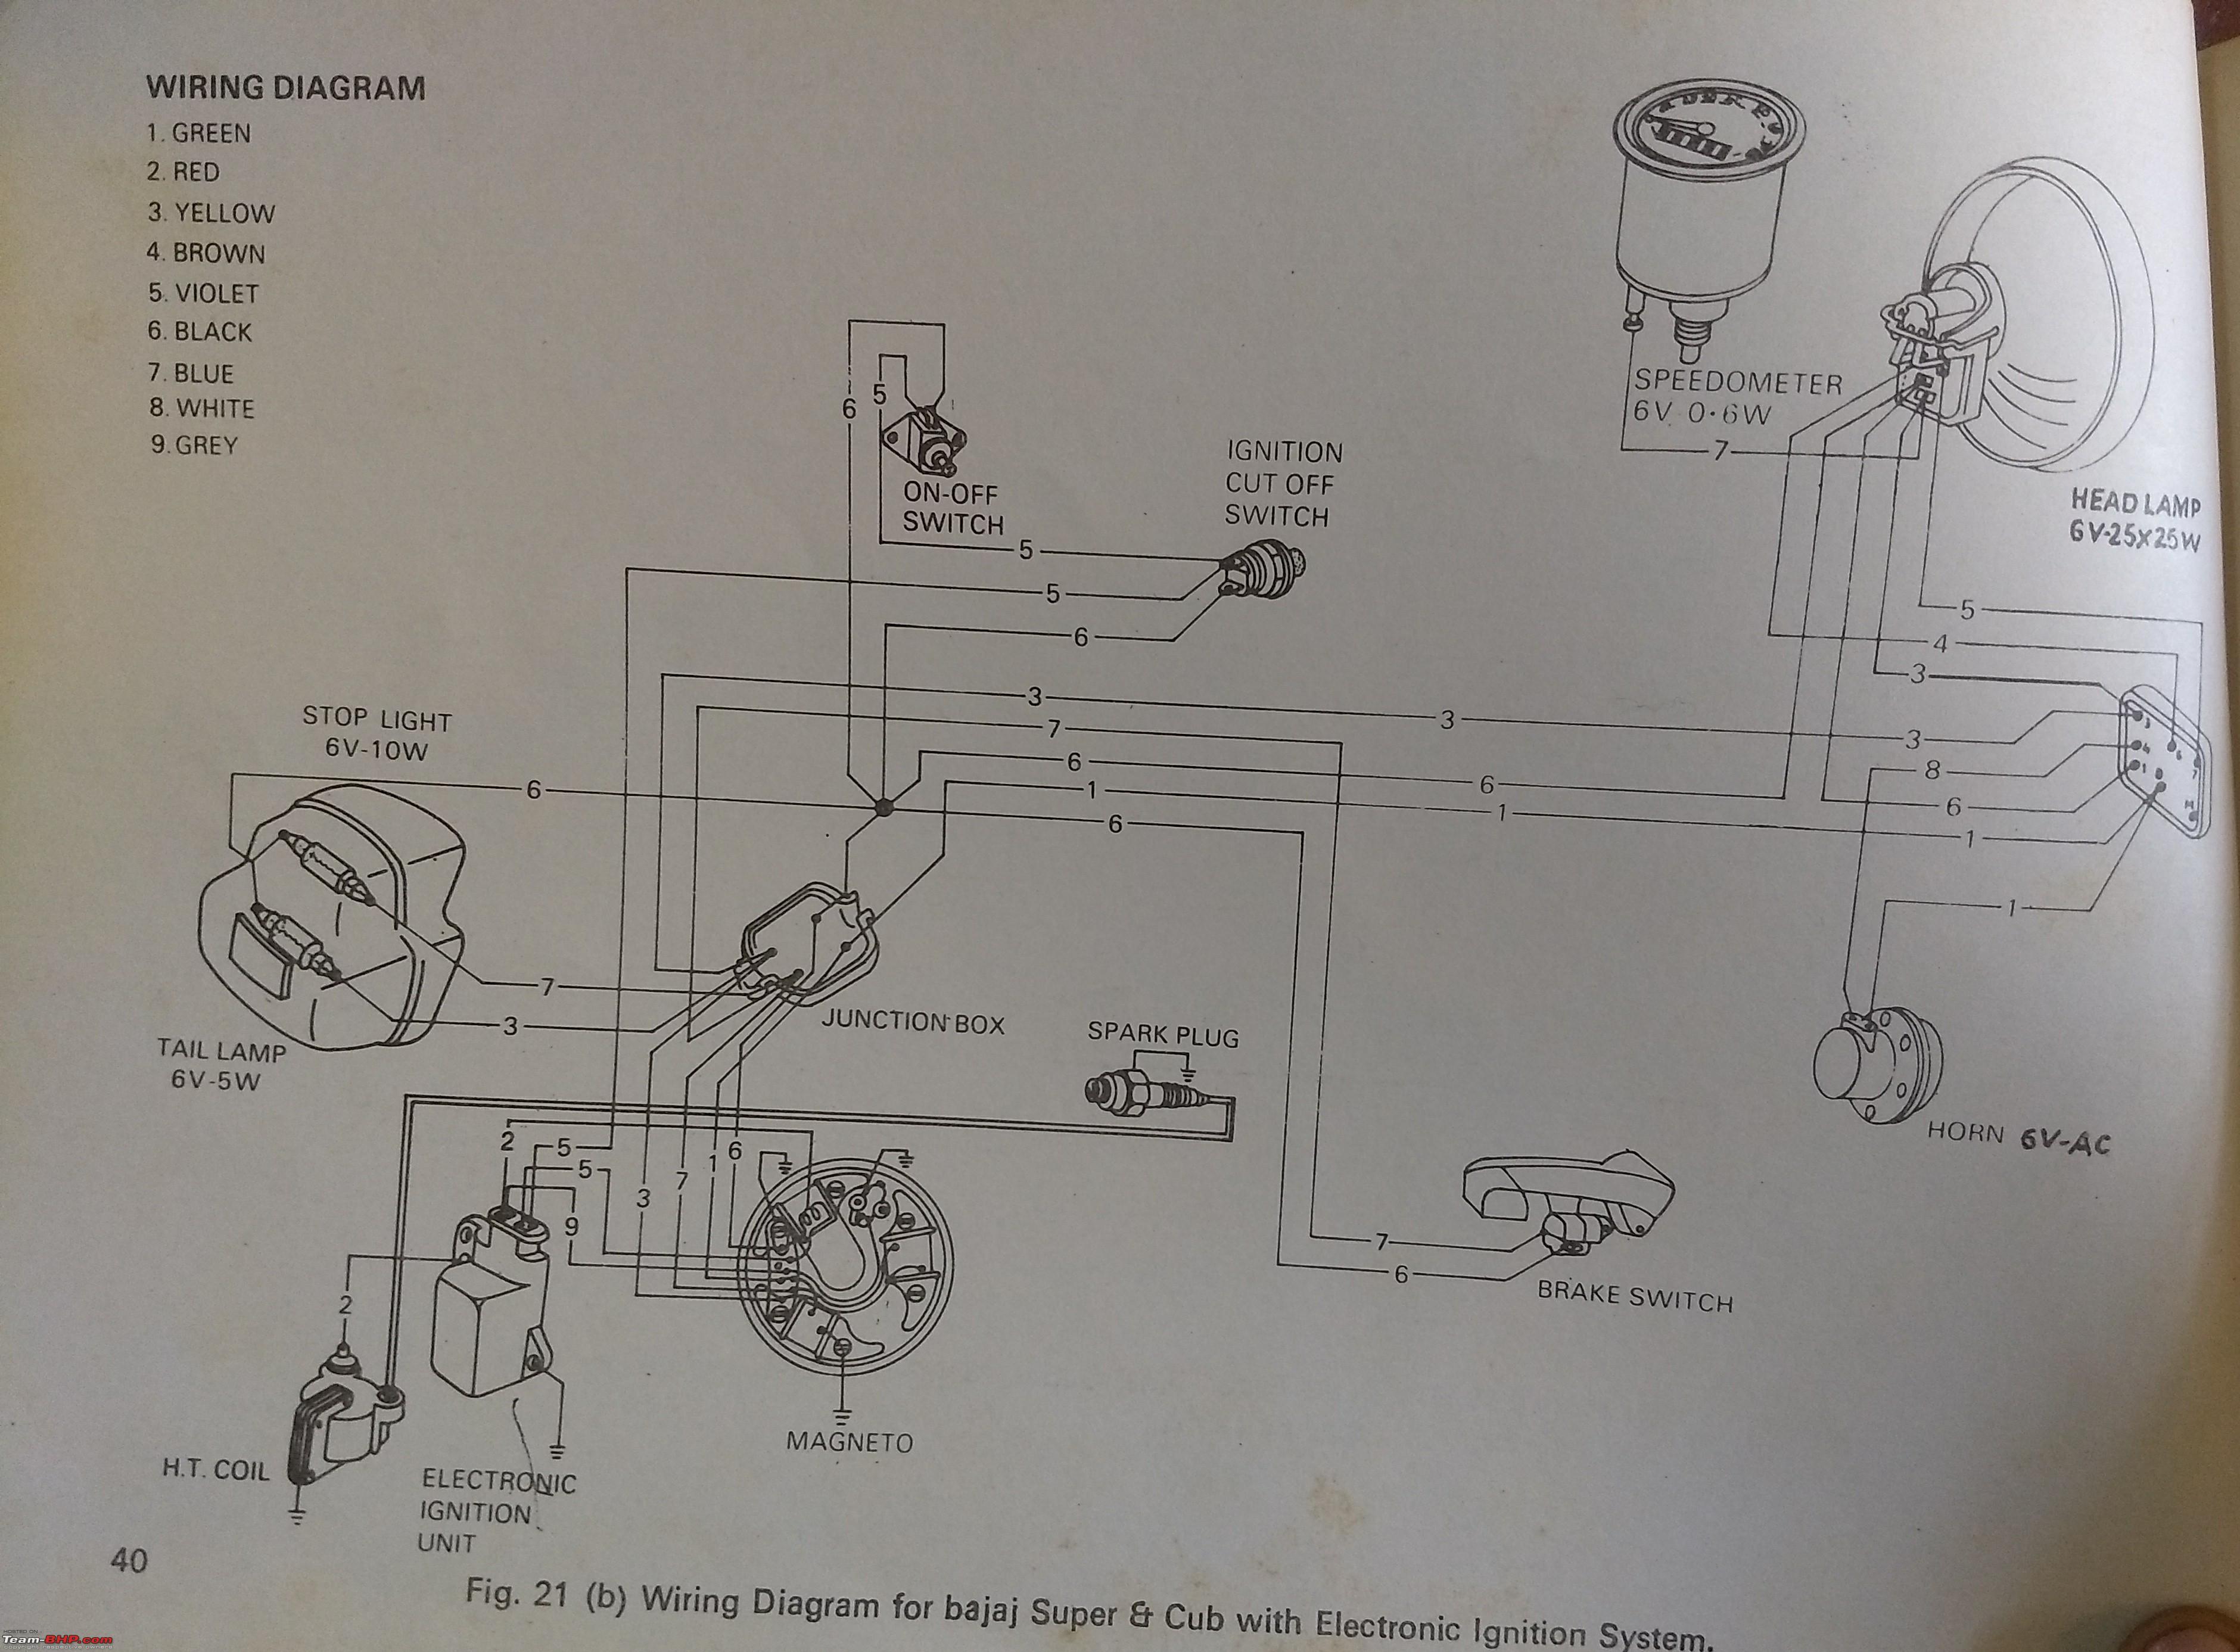 Wiring diagrams of Indian two-wheelers - Team-BHP